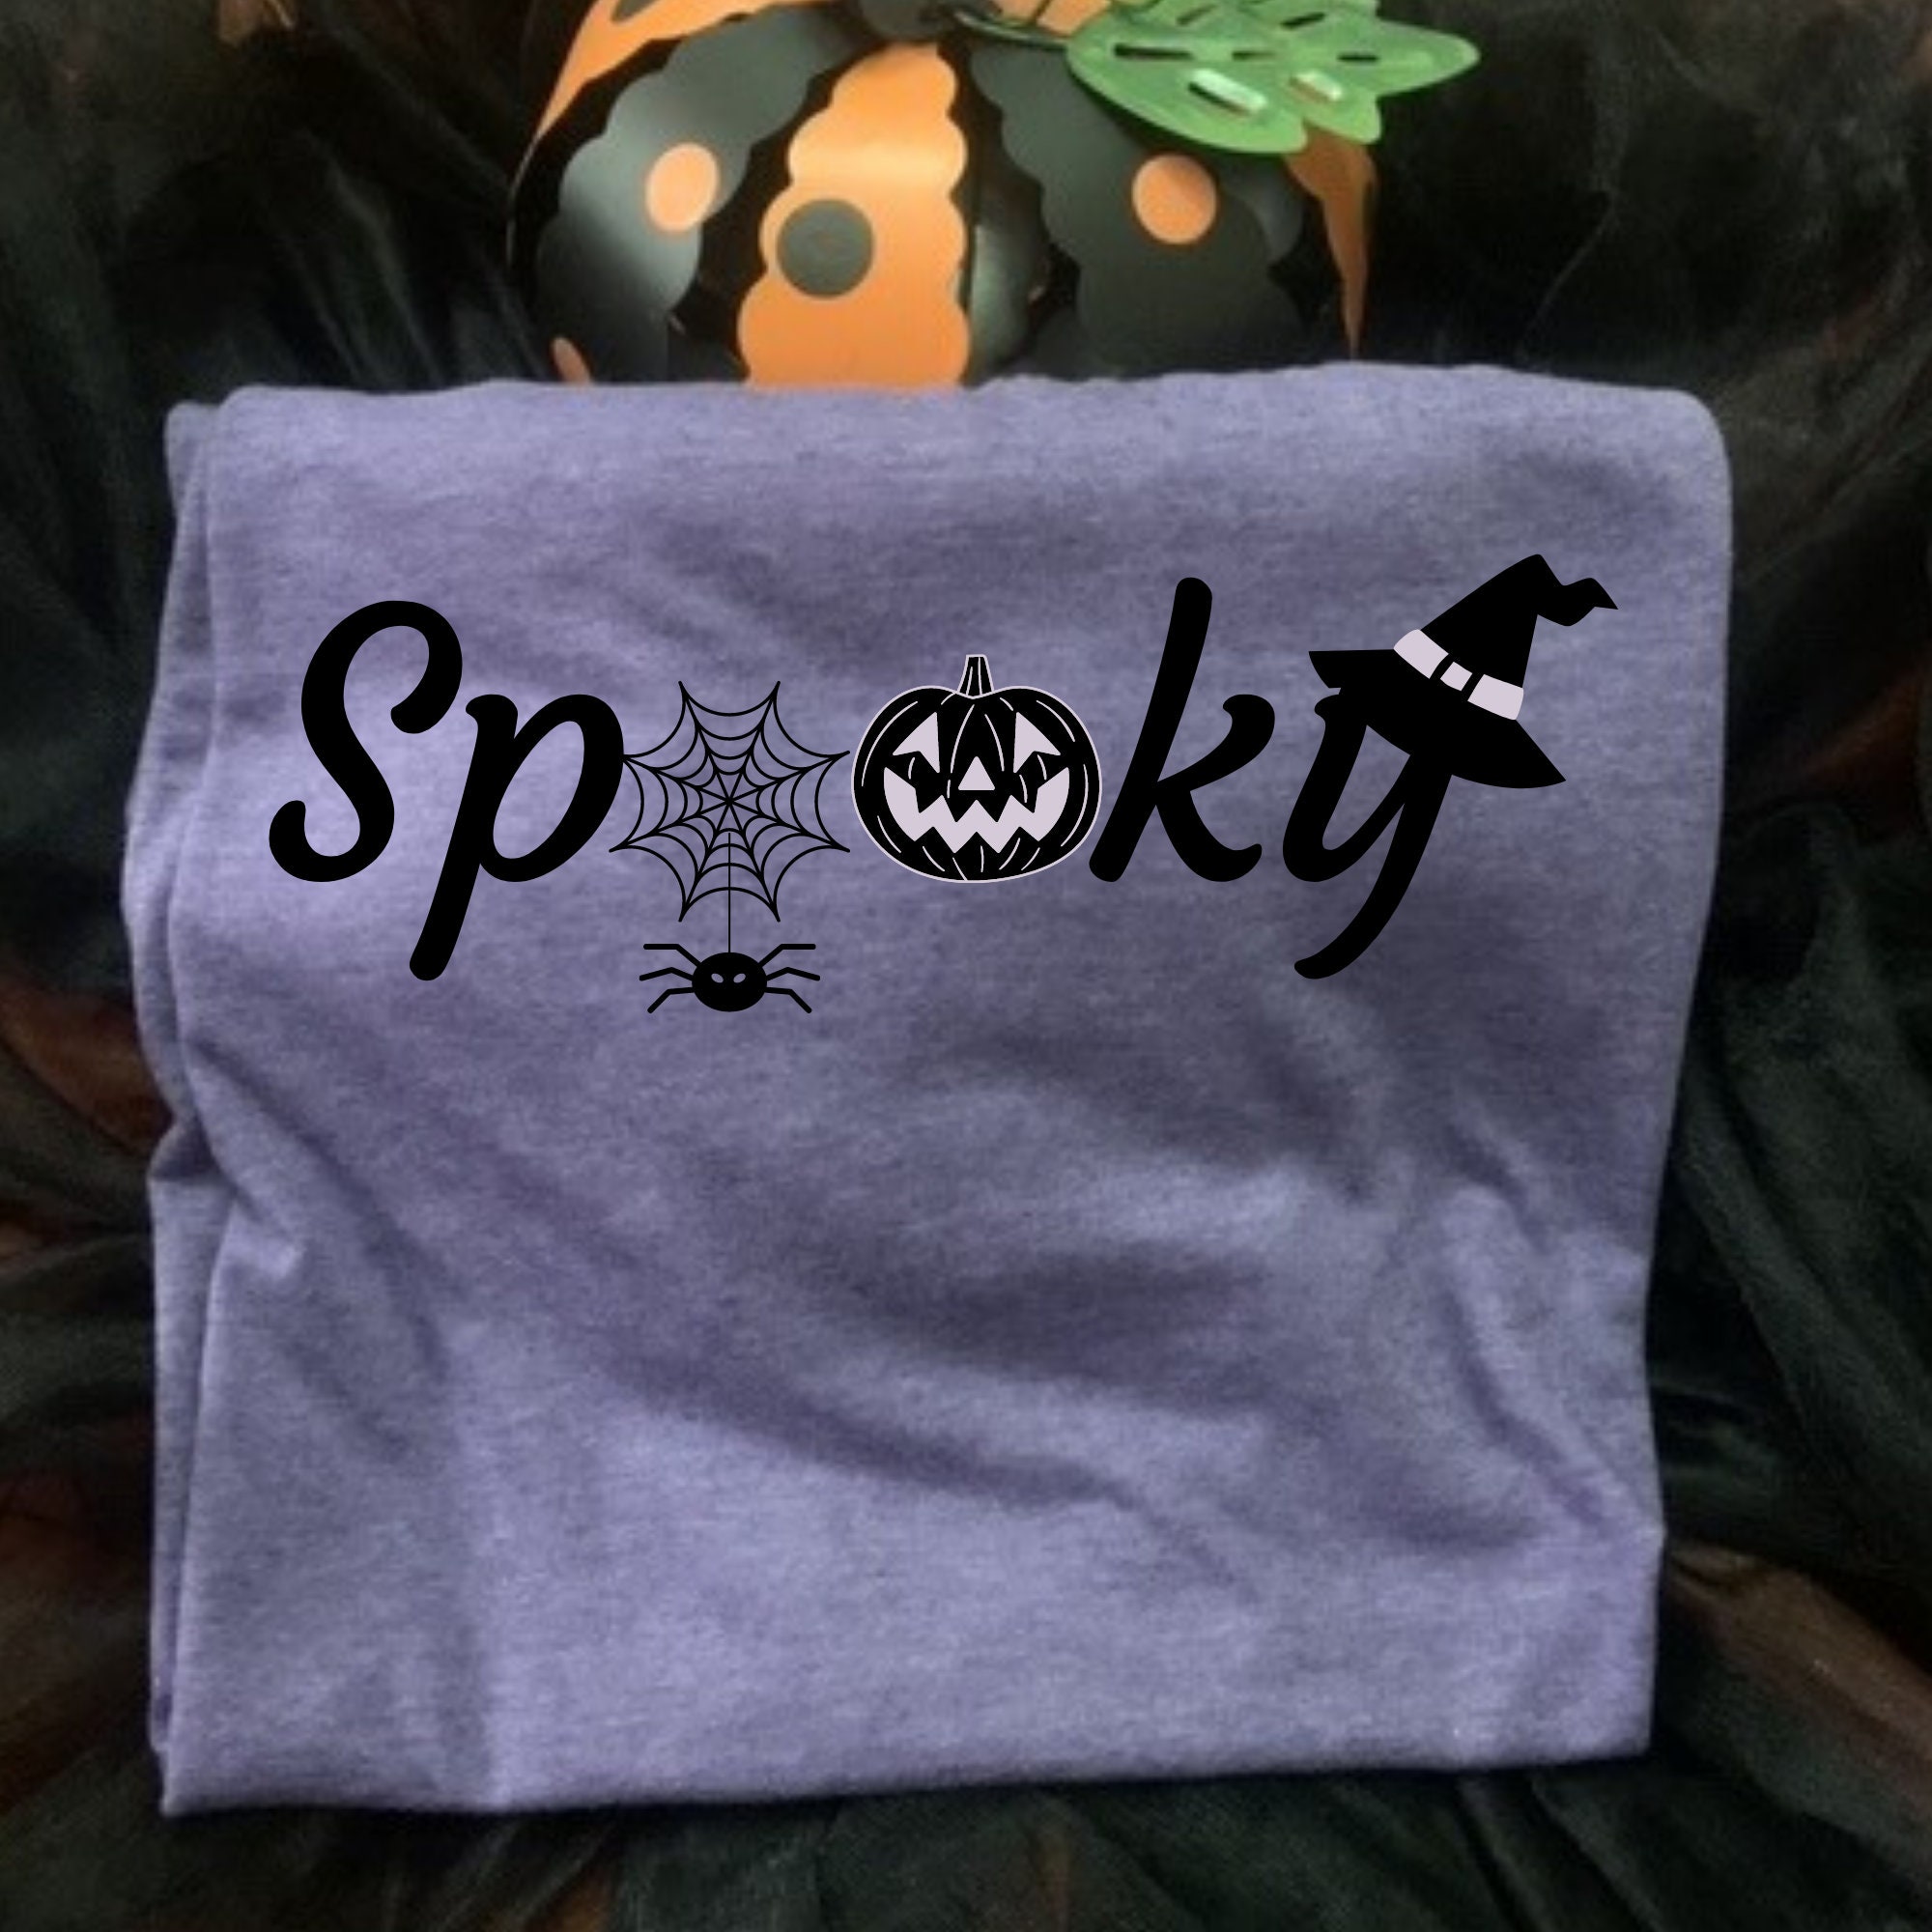 Discover Spooky Halloween Shirt for the Whole Family - Mens, Womens, Kids, Toddler and Baby sizing - spider, pumpkin, jack-o-lantern, witch hat